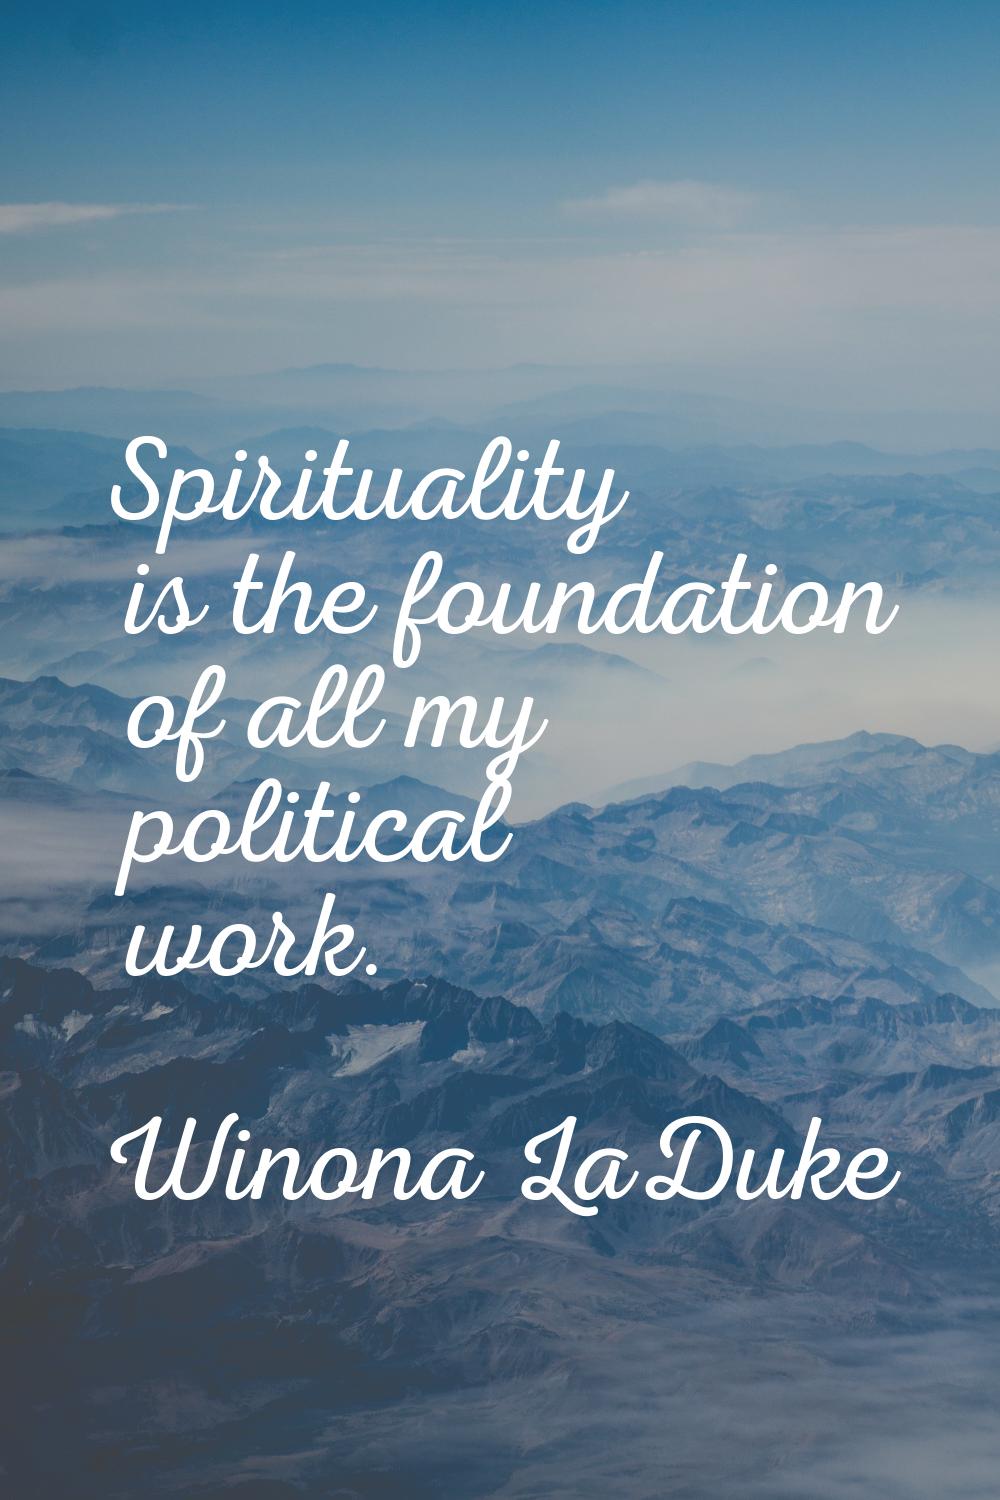 Spirituality is the foundation of all my political work.